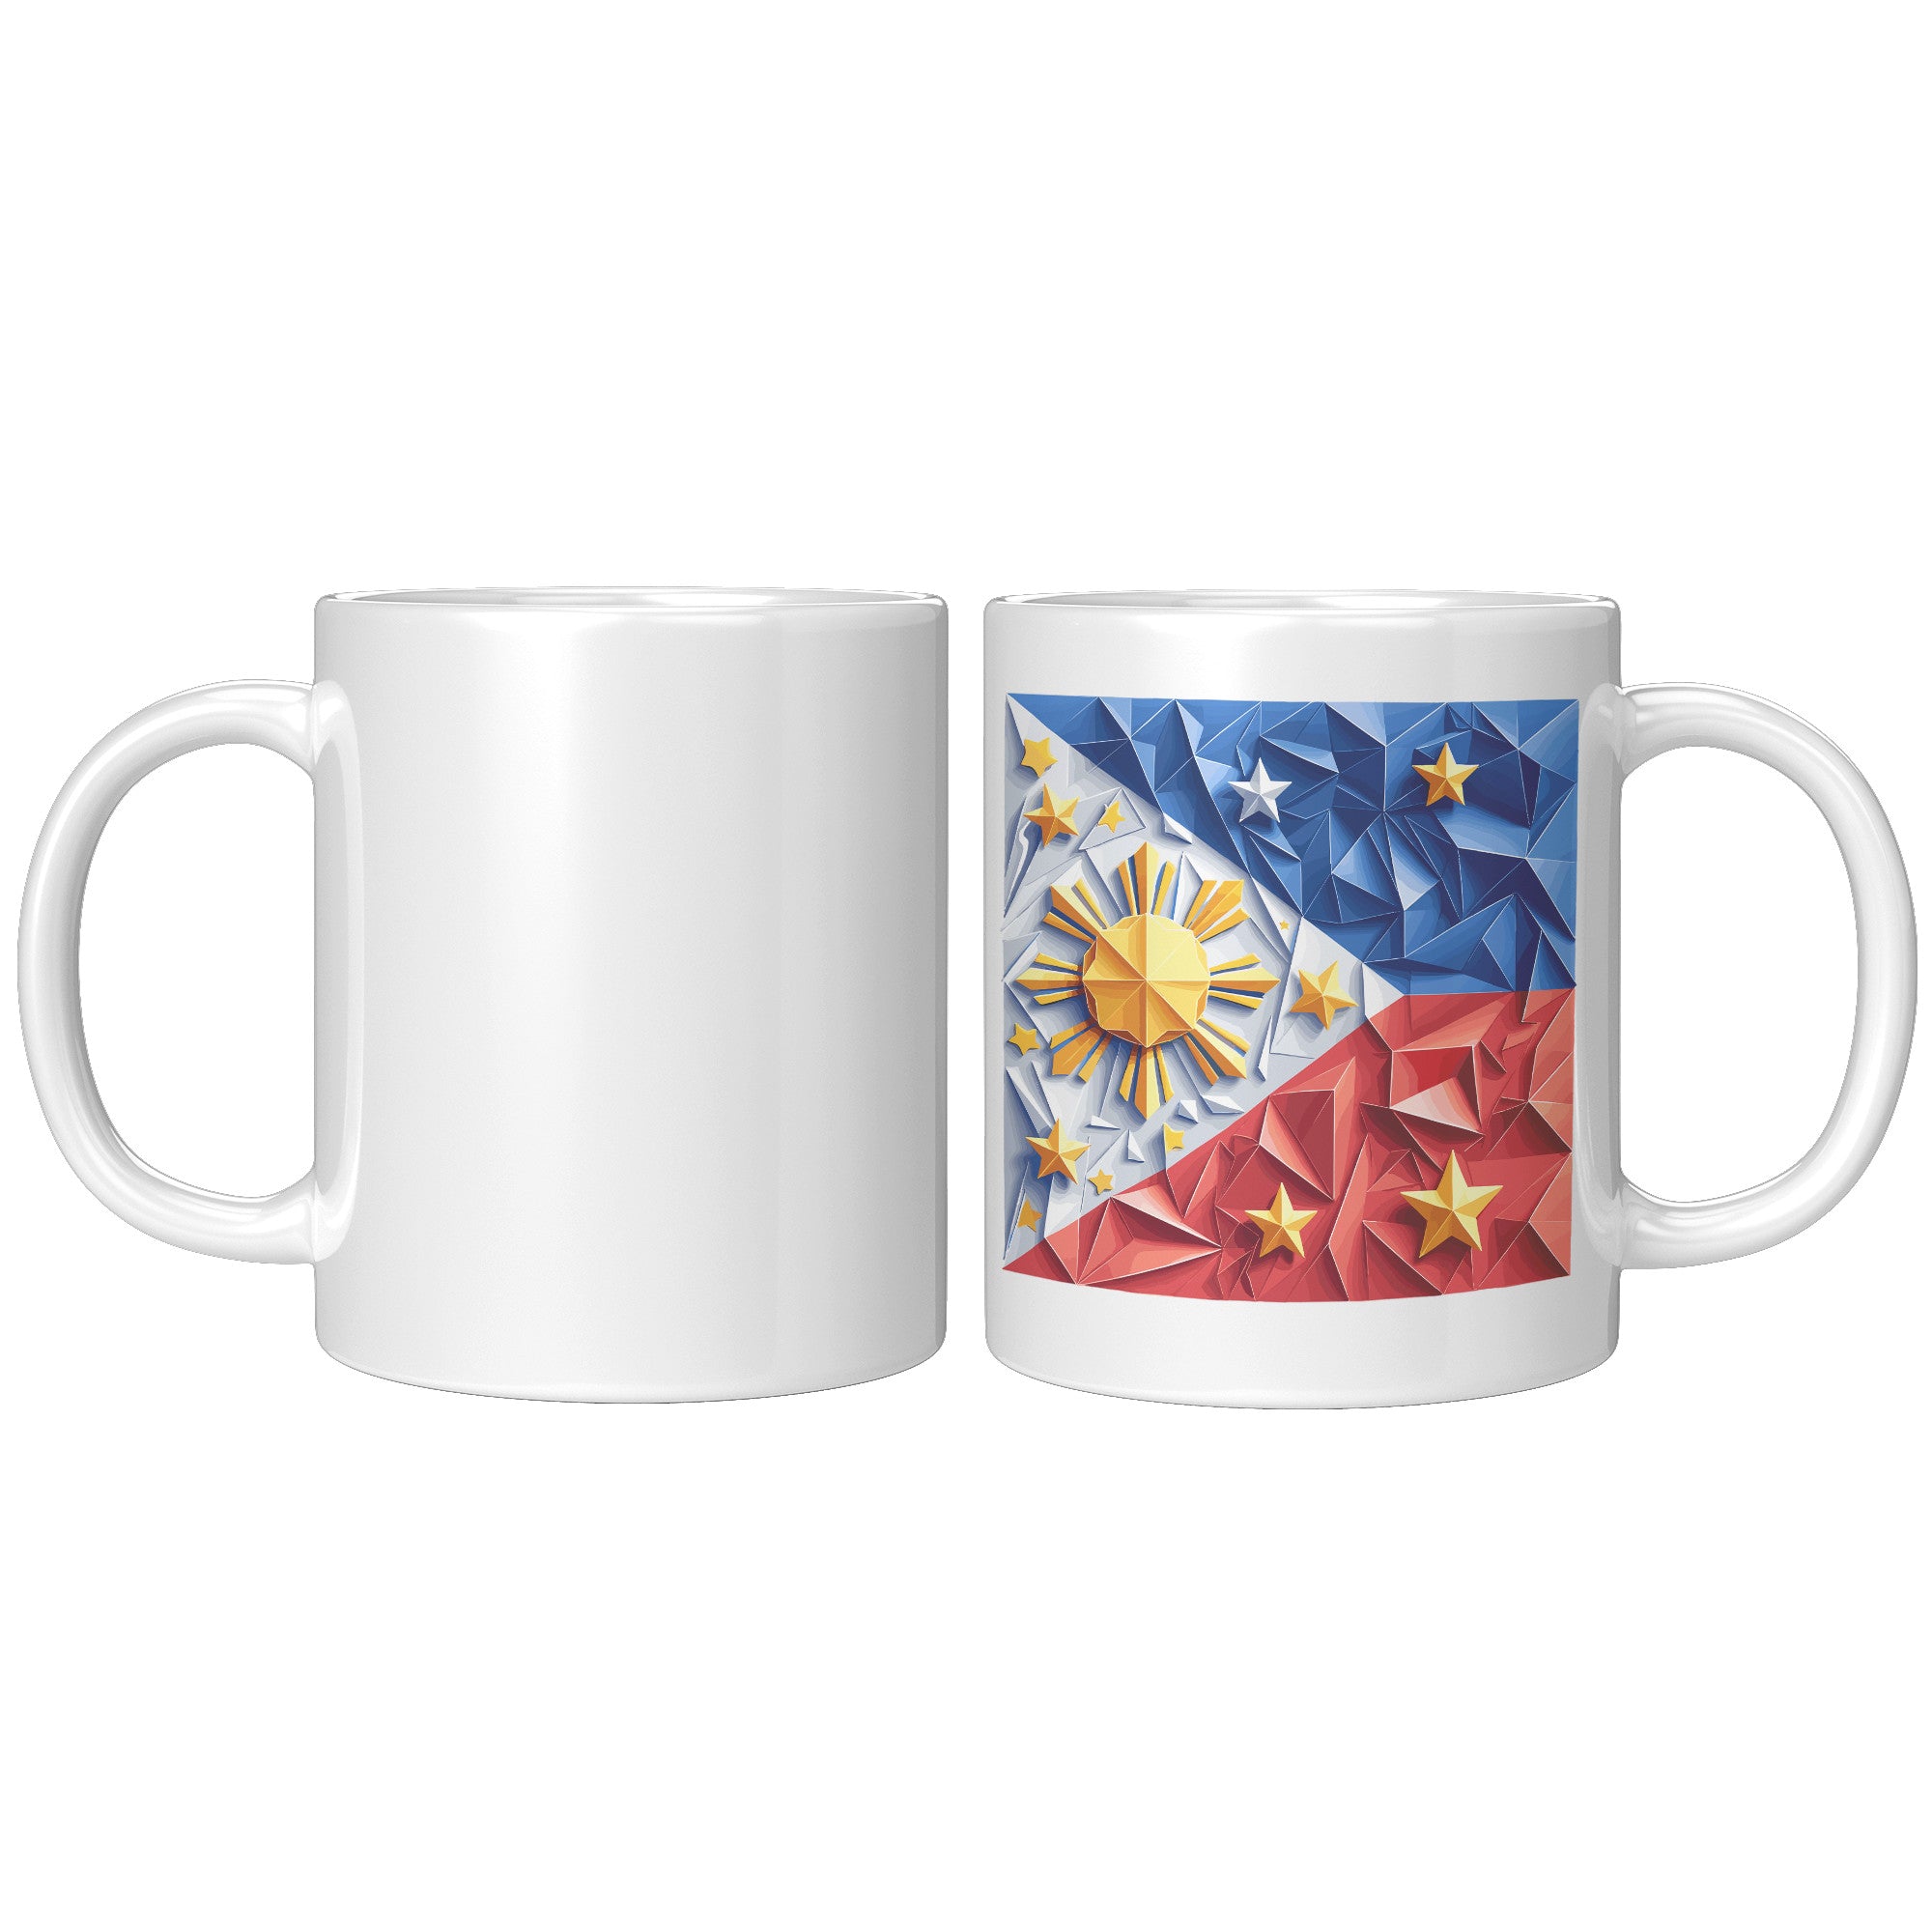 Proudly Pinoy Coffee Mug - Vibrant Filipino Flag Design - Patriotic Gift for Filipinos - Celebrate Heritage with Every Sip!" - N